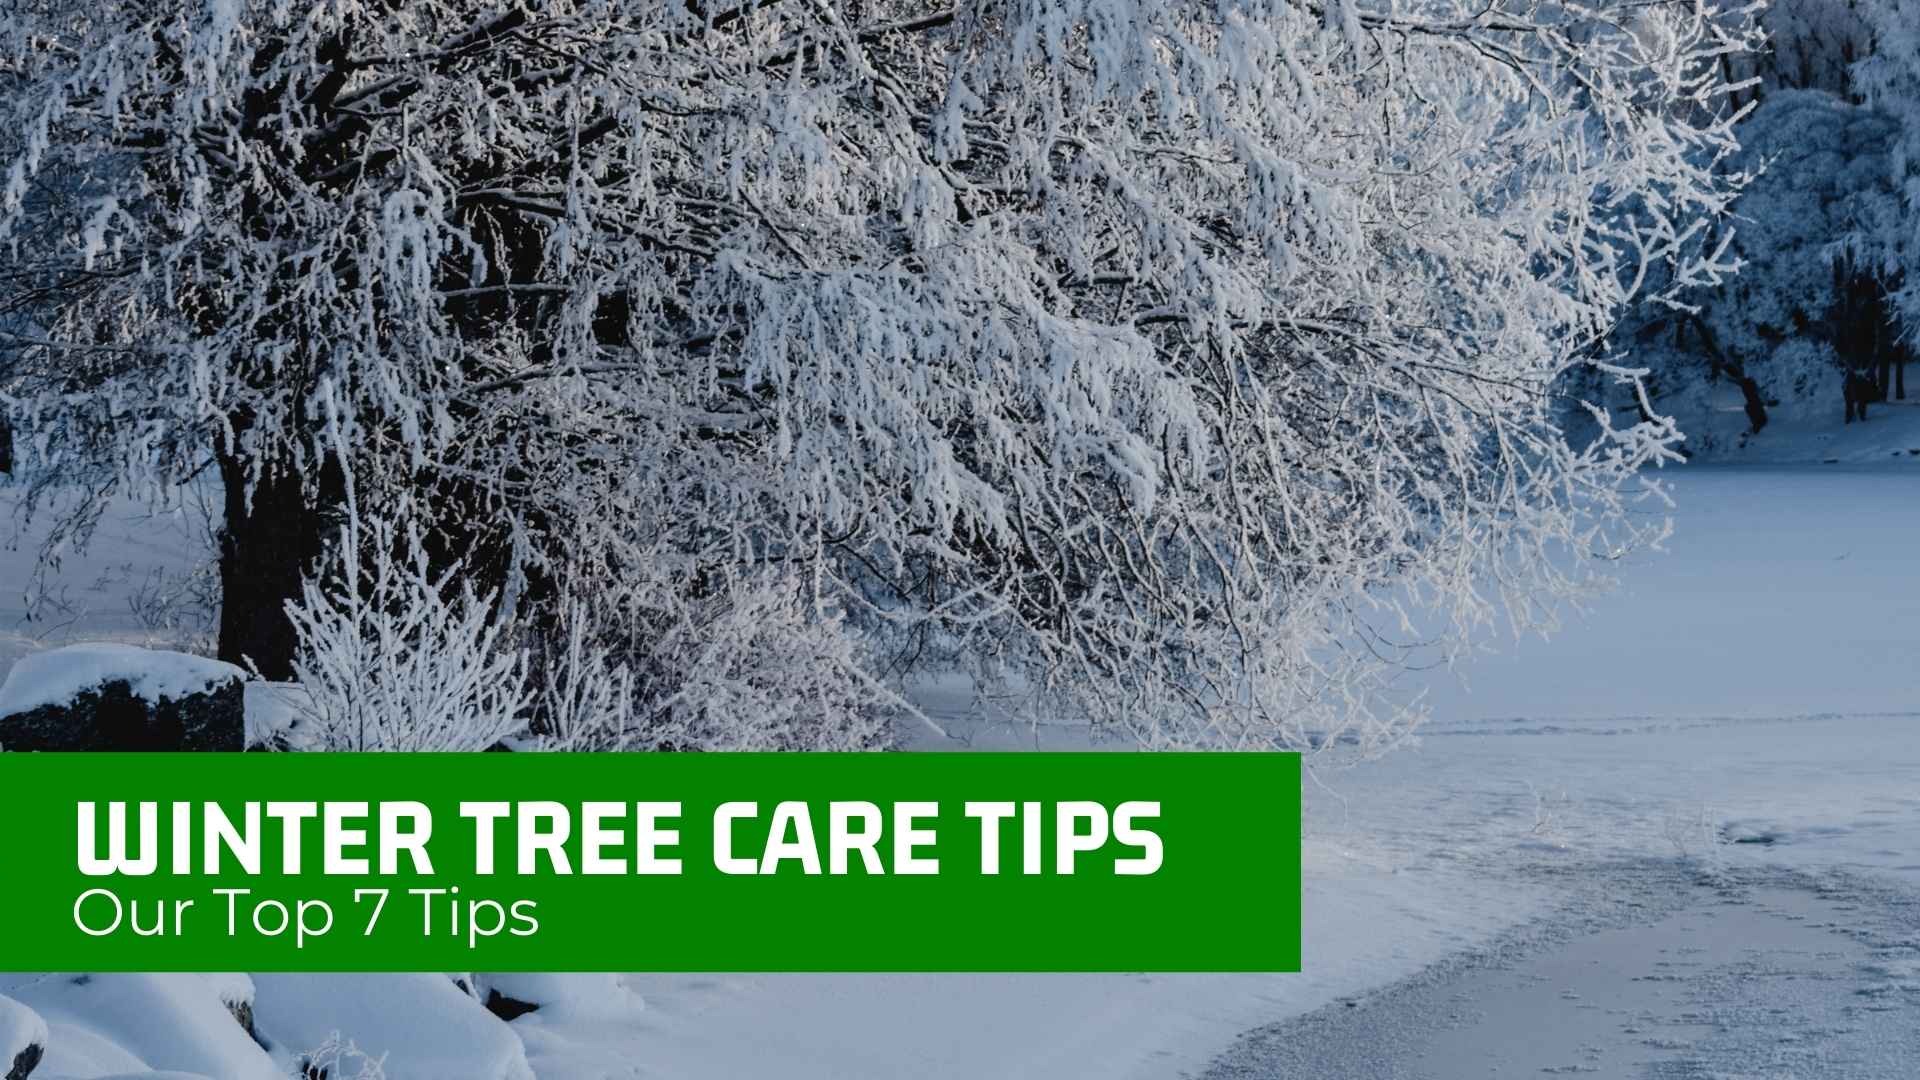 The Top 7 Winter Tree Care Tips